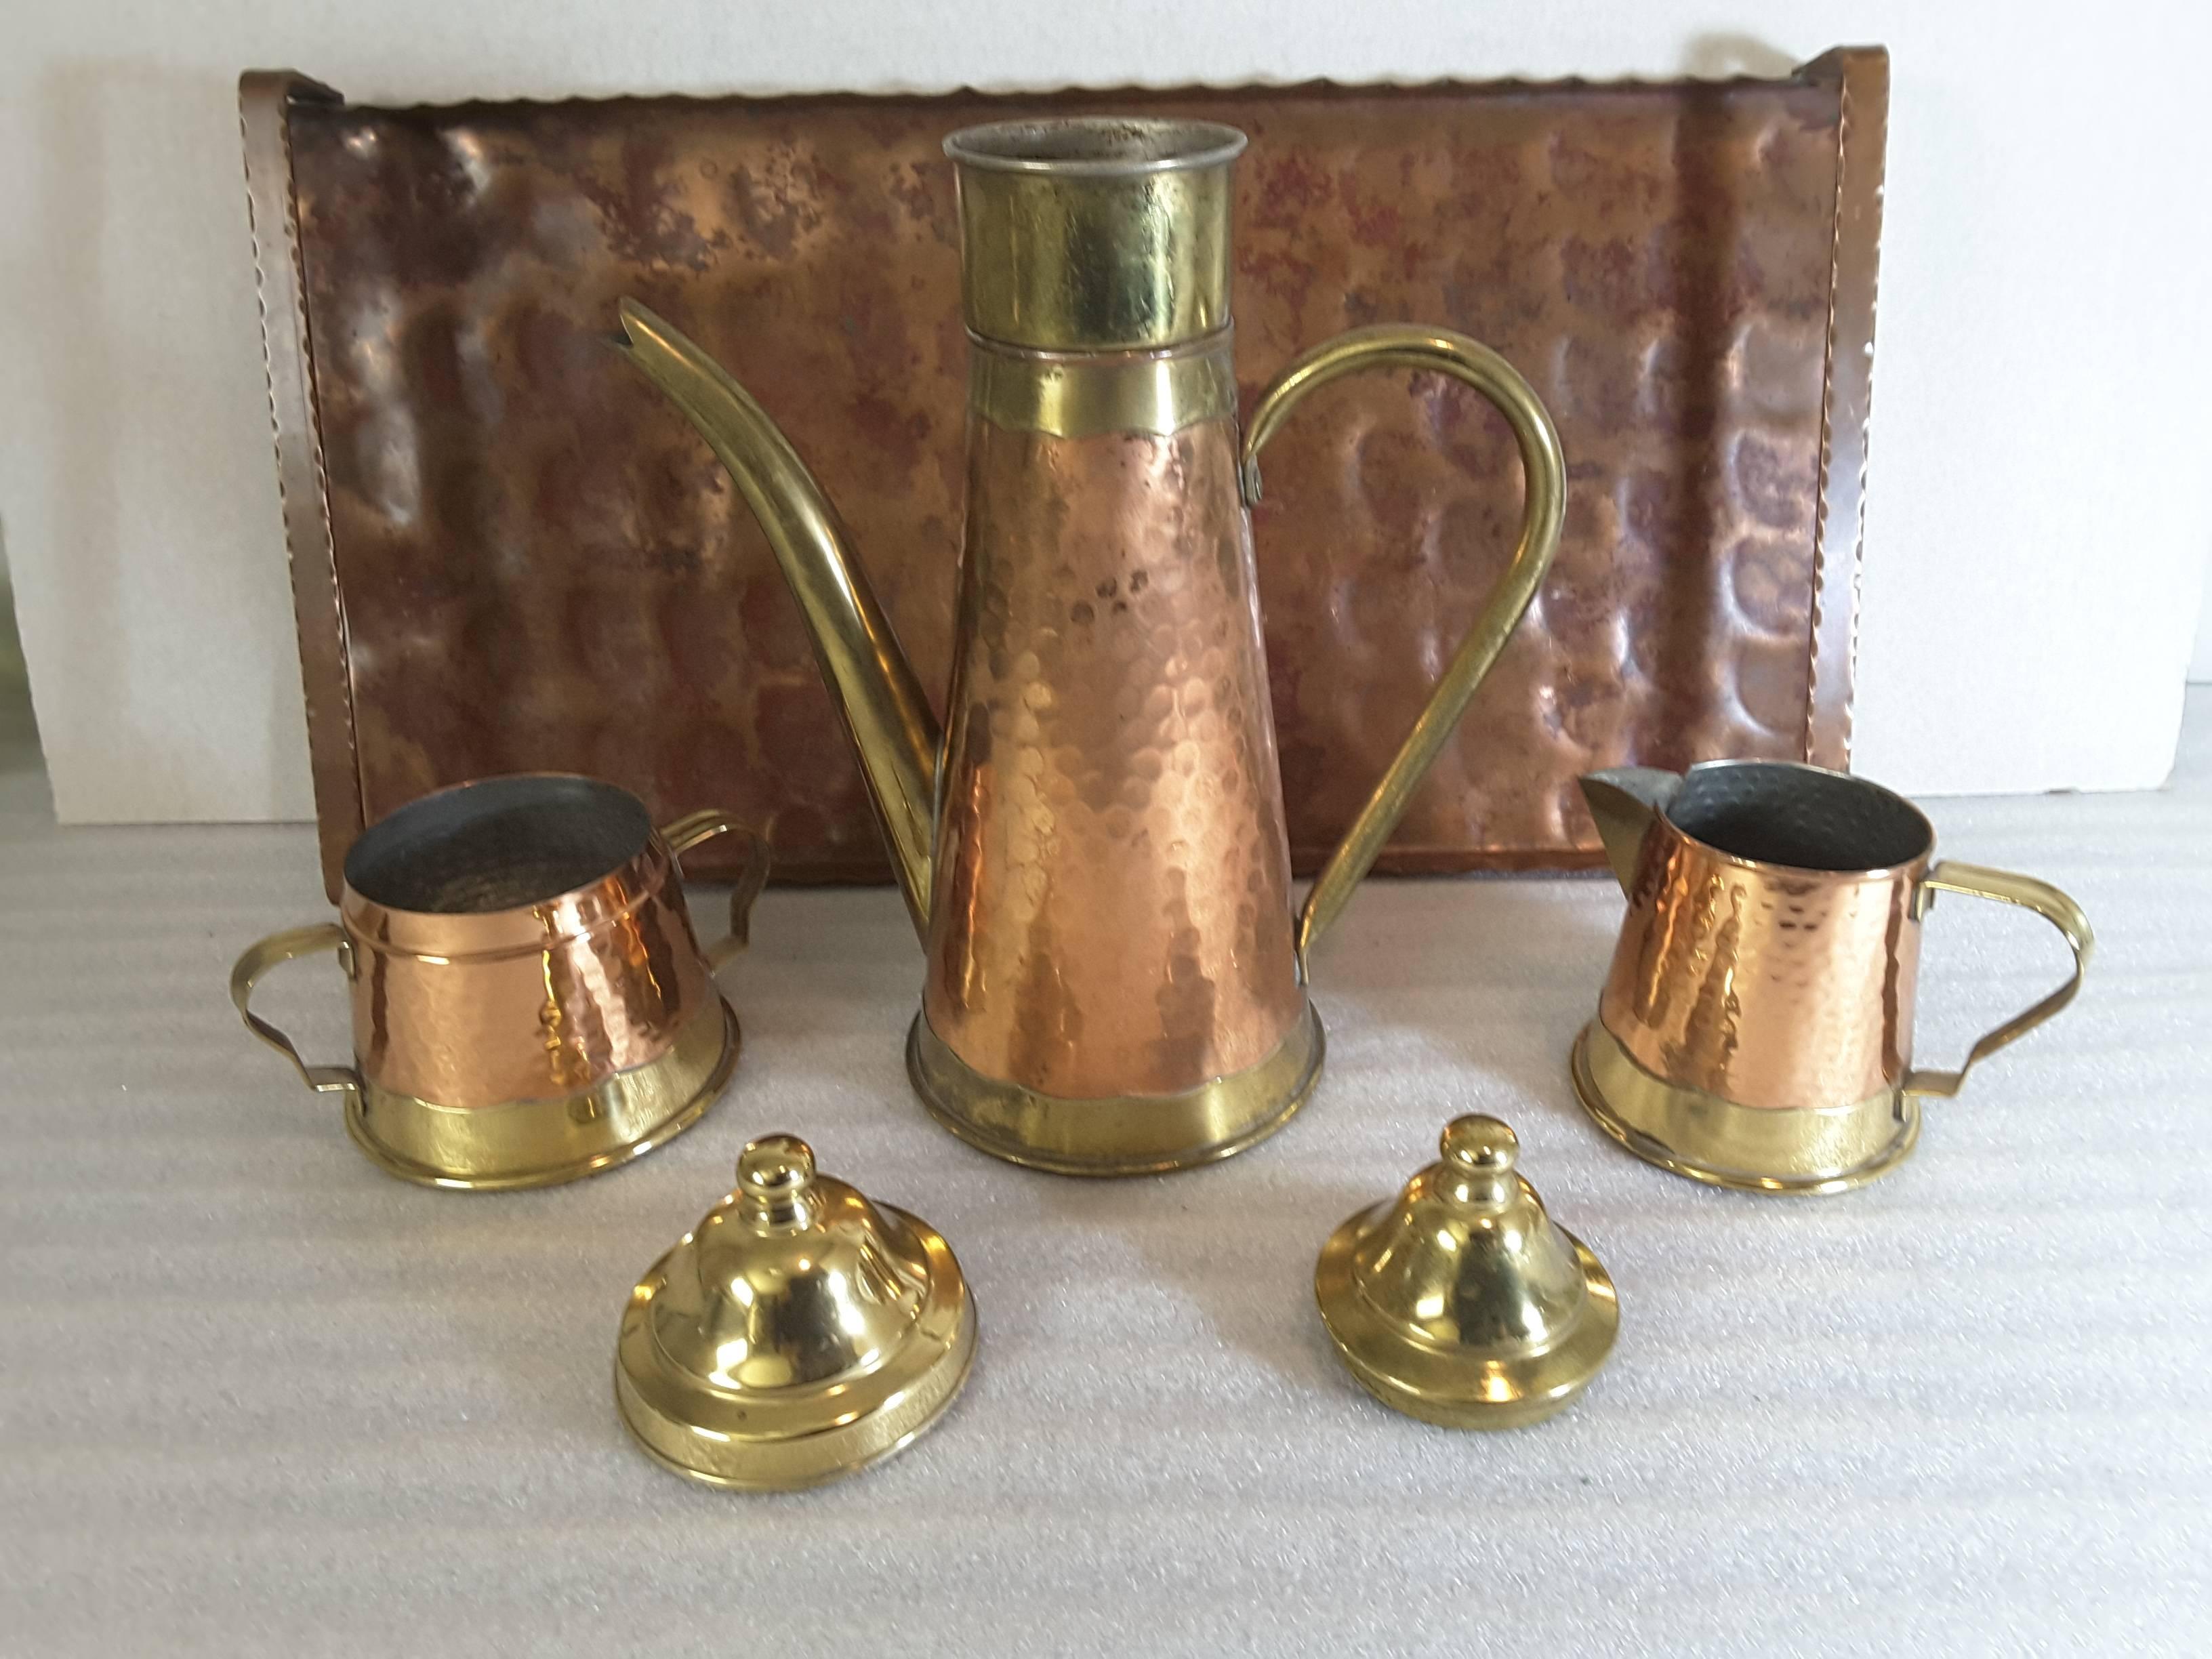 Belgian Exquisite Planished Copper and Brass Coffee Set, by Dinanderie de Mecap